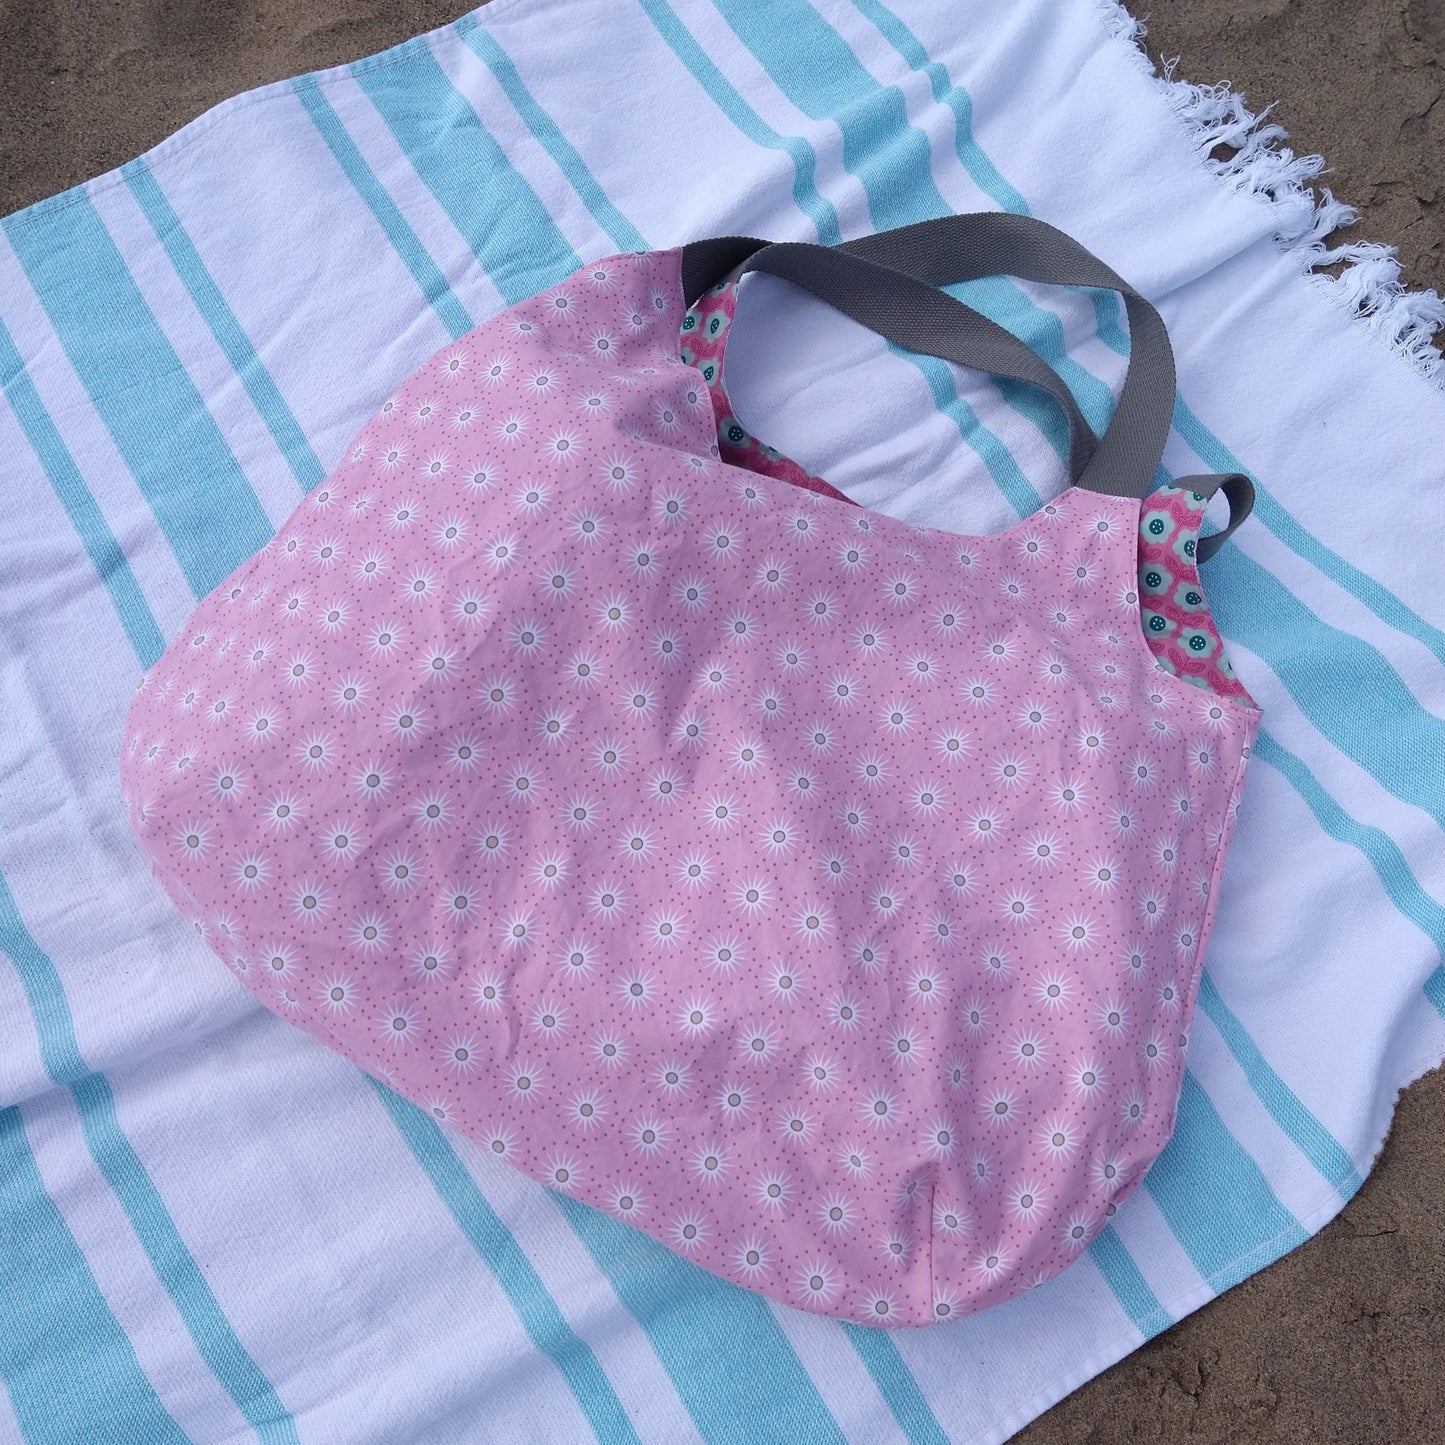 Shopping/Beach bag, reversible, size large, baby pink flowers (Handmade in Canada)